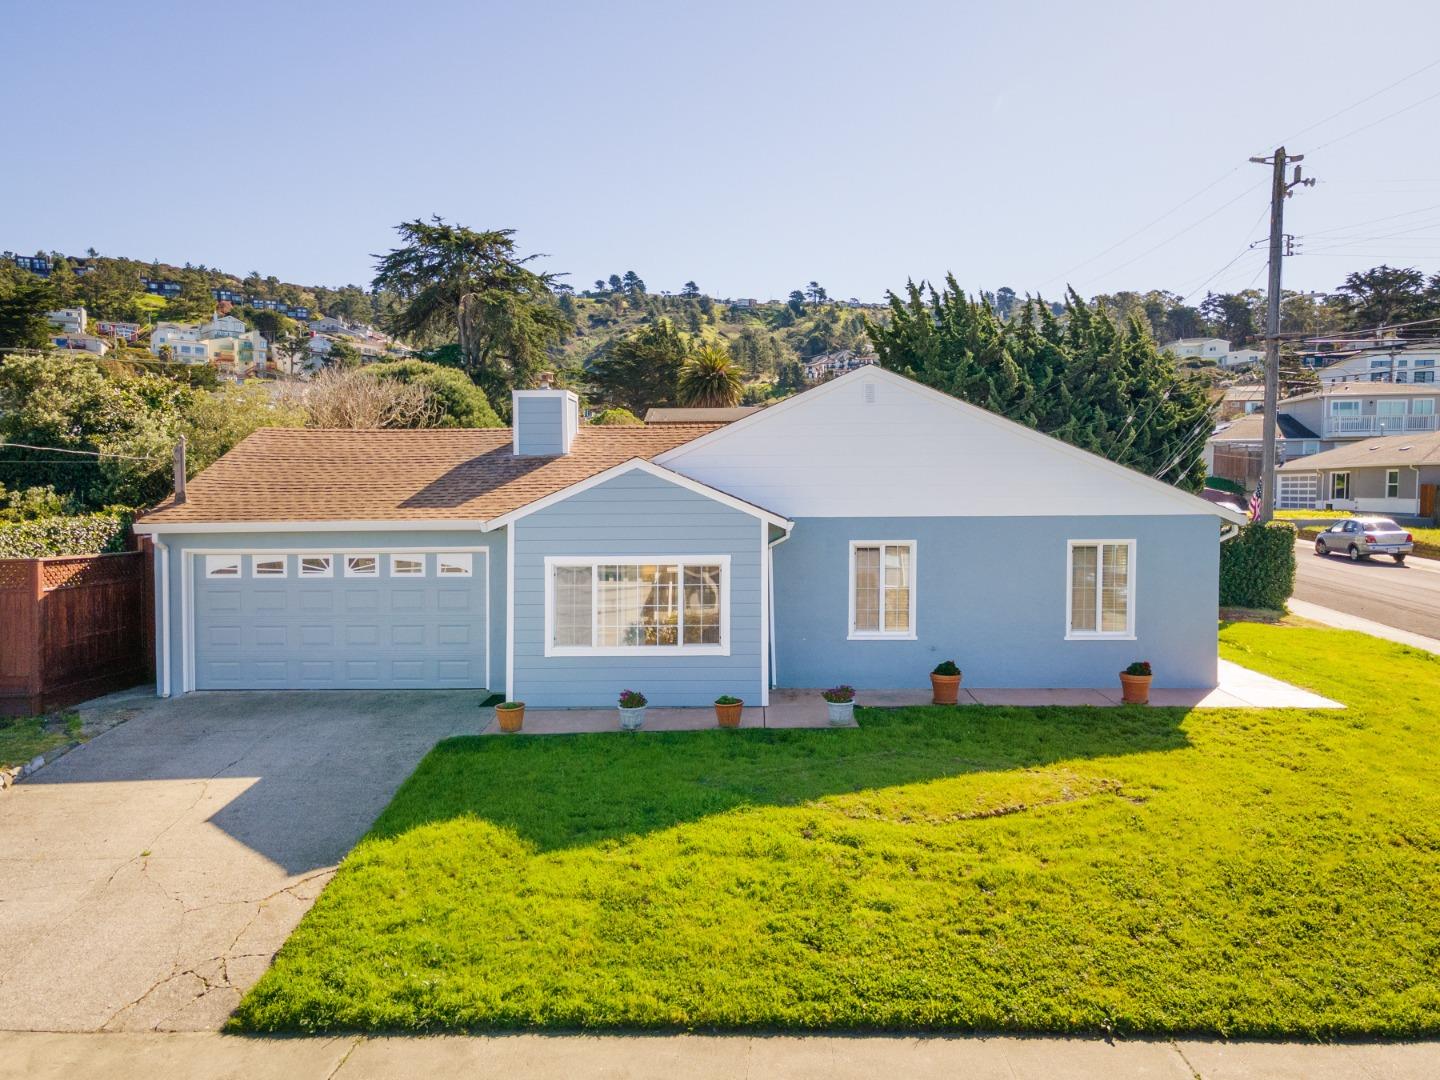 Photo of 341 Fremont Ave in Pacifica, CA